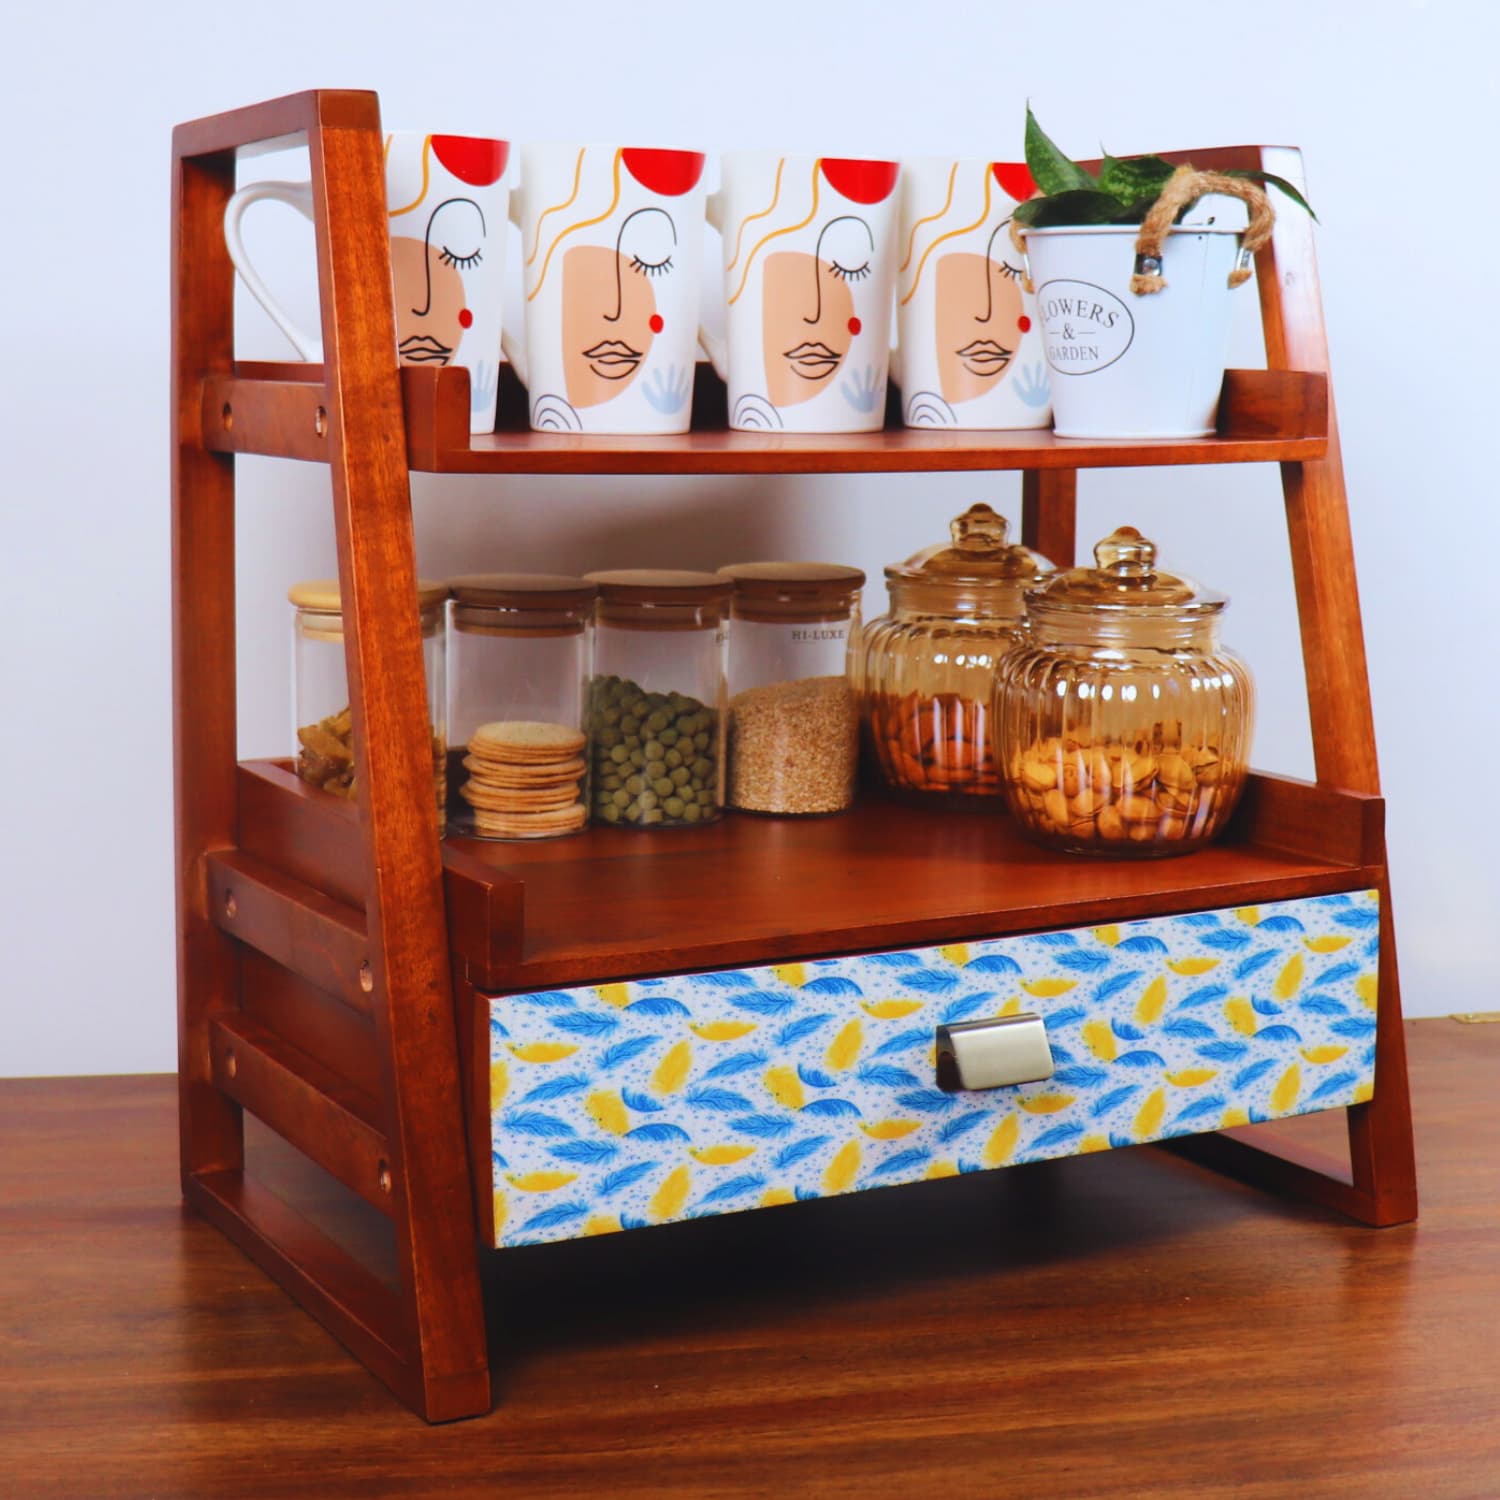 The Best Wooden Kitchen organizer online in India Whispering Feathers Edition